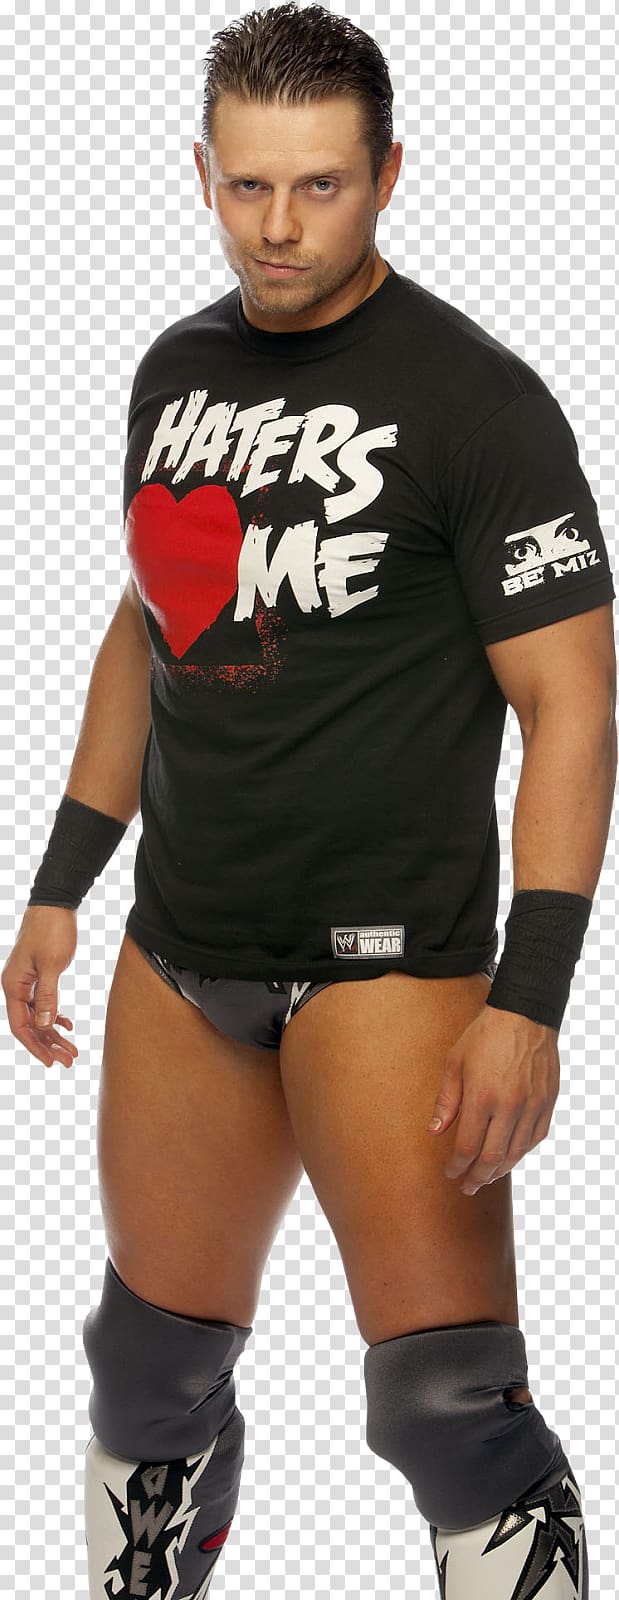 Jersey T-shirt Professional wrestling WWE Professional Wrestler, others transparent background PNG clipart